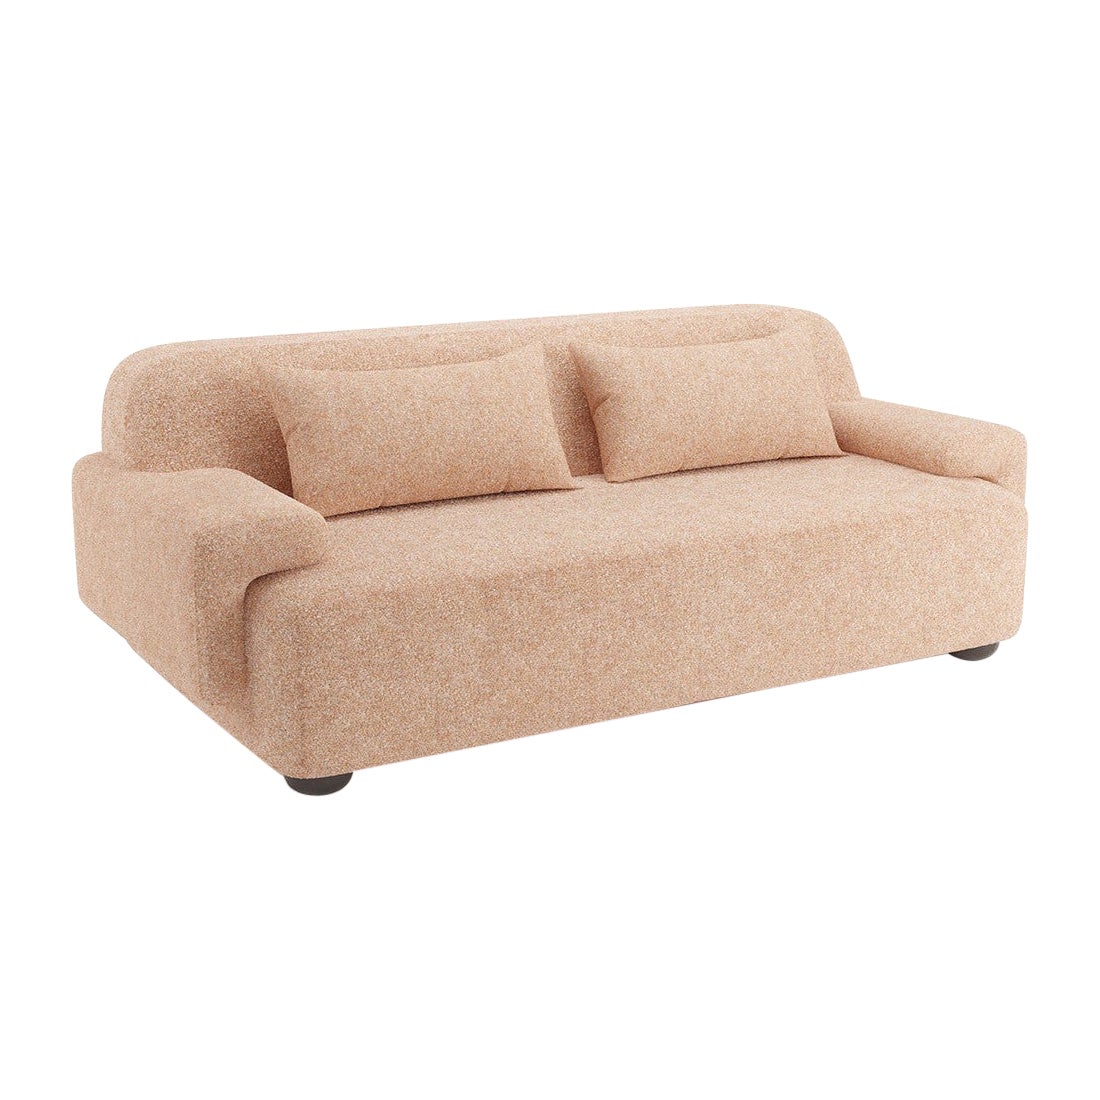 Popus Editions Lena 2.5 Seater Sofa in Nude Antwerp Linen Upholstery For Sale